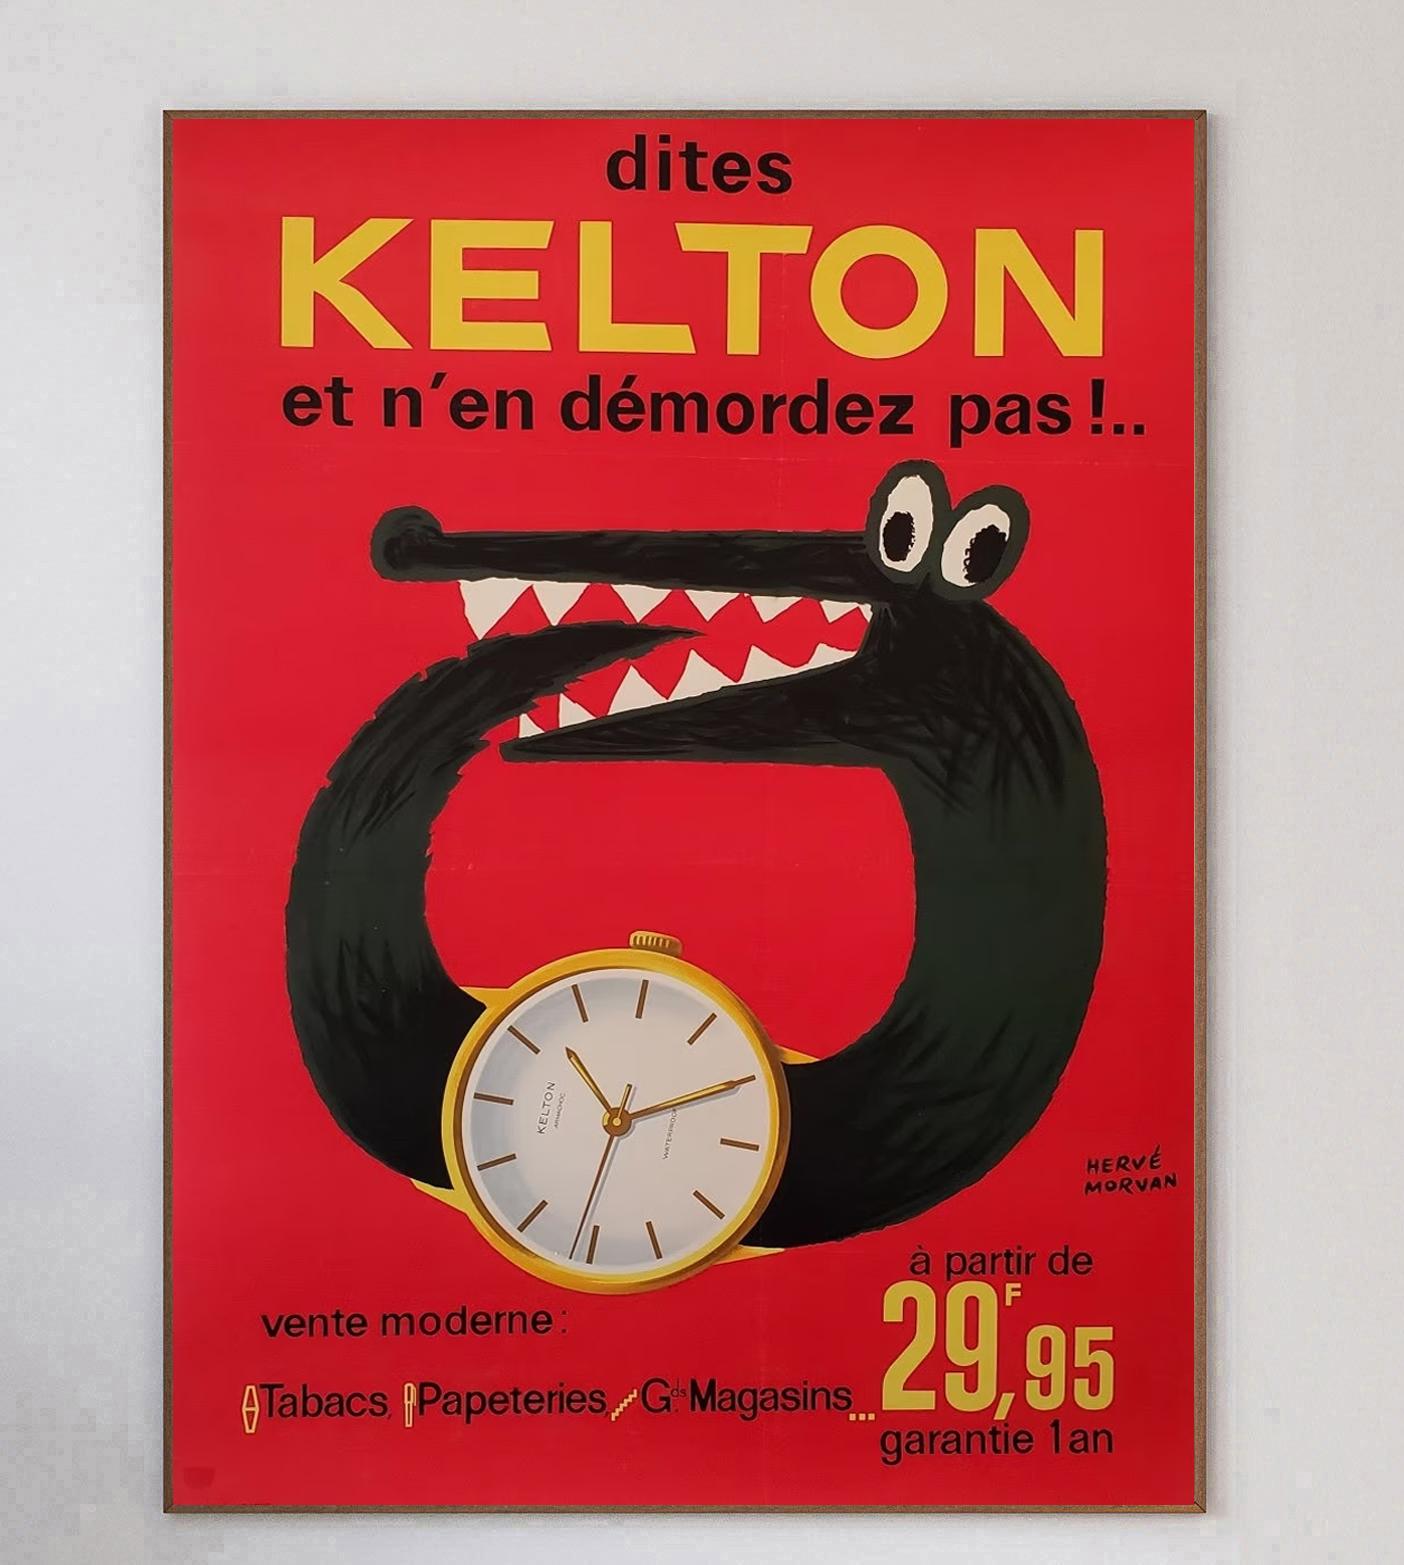 Charming poster for Kelton watches created in 1955. Founded in 1955, French watchmaker Kelton still continues to this day. 

With wonderful artwork from esteemed French painter Herve Morvan depicting a watch stylised as a crocodile eating its tail,